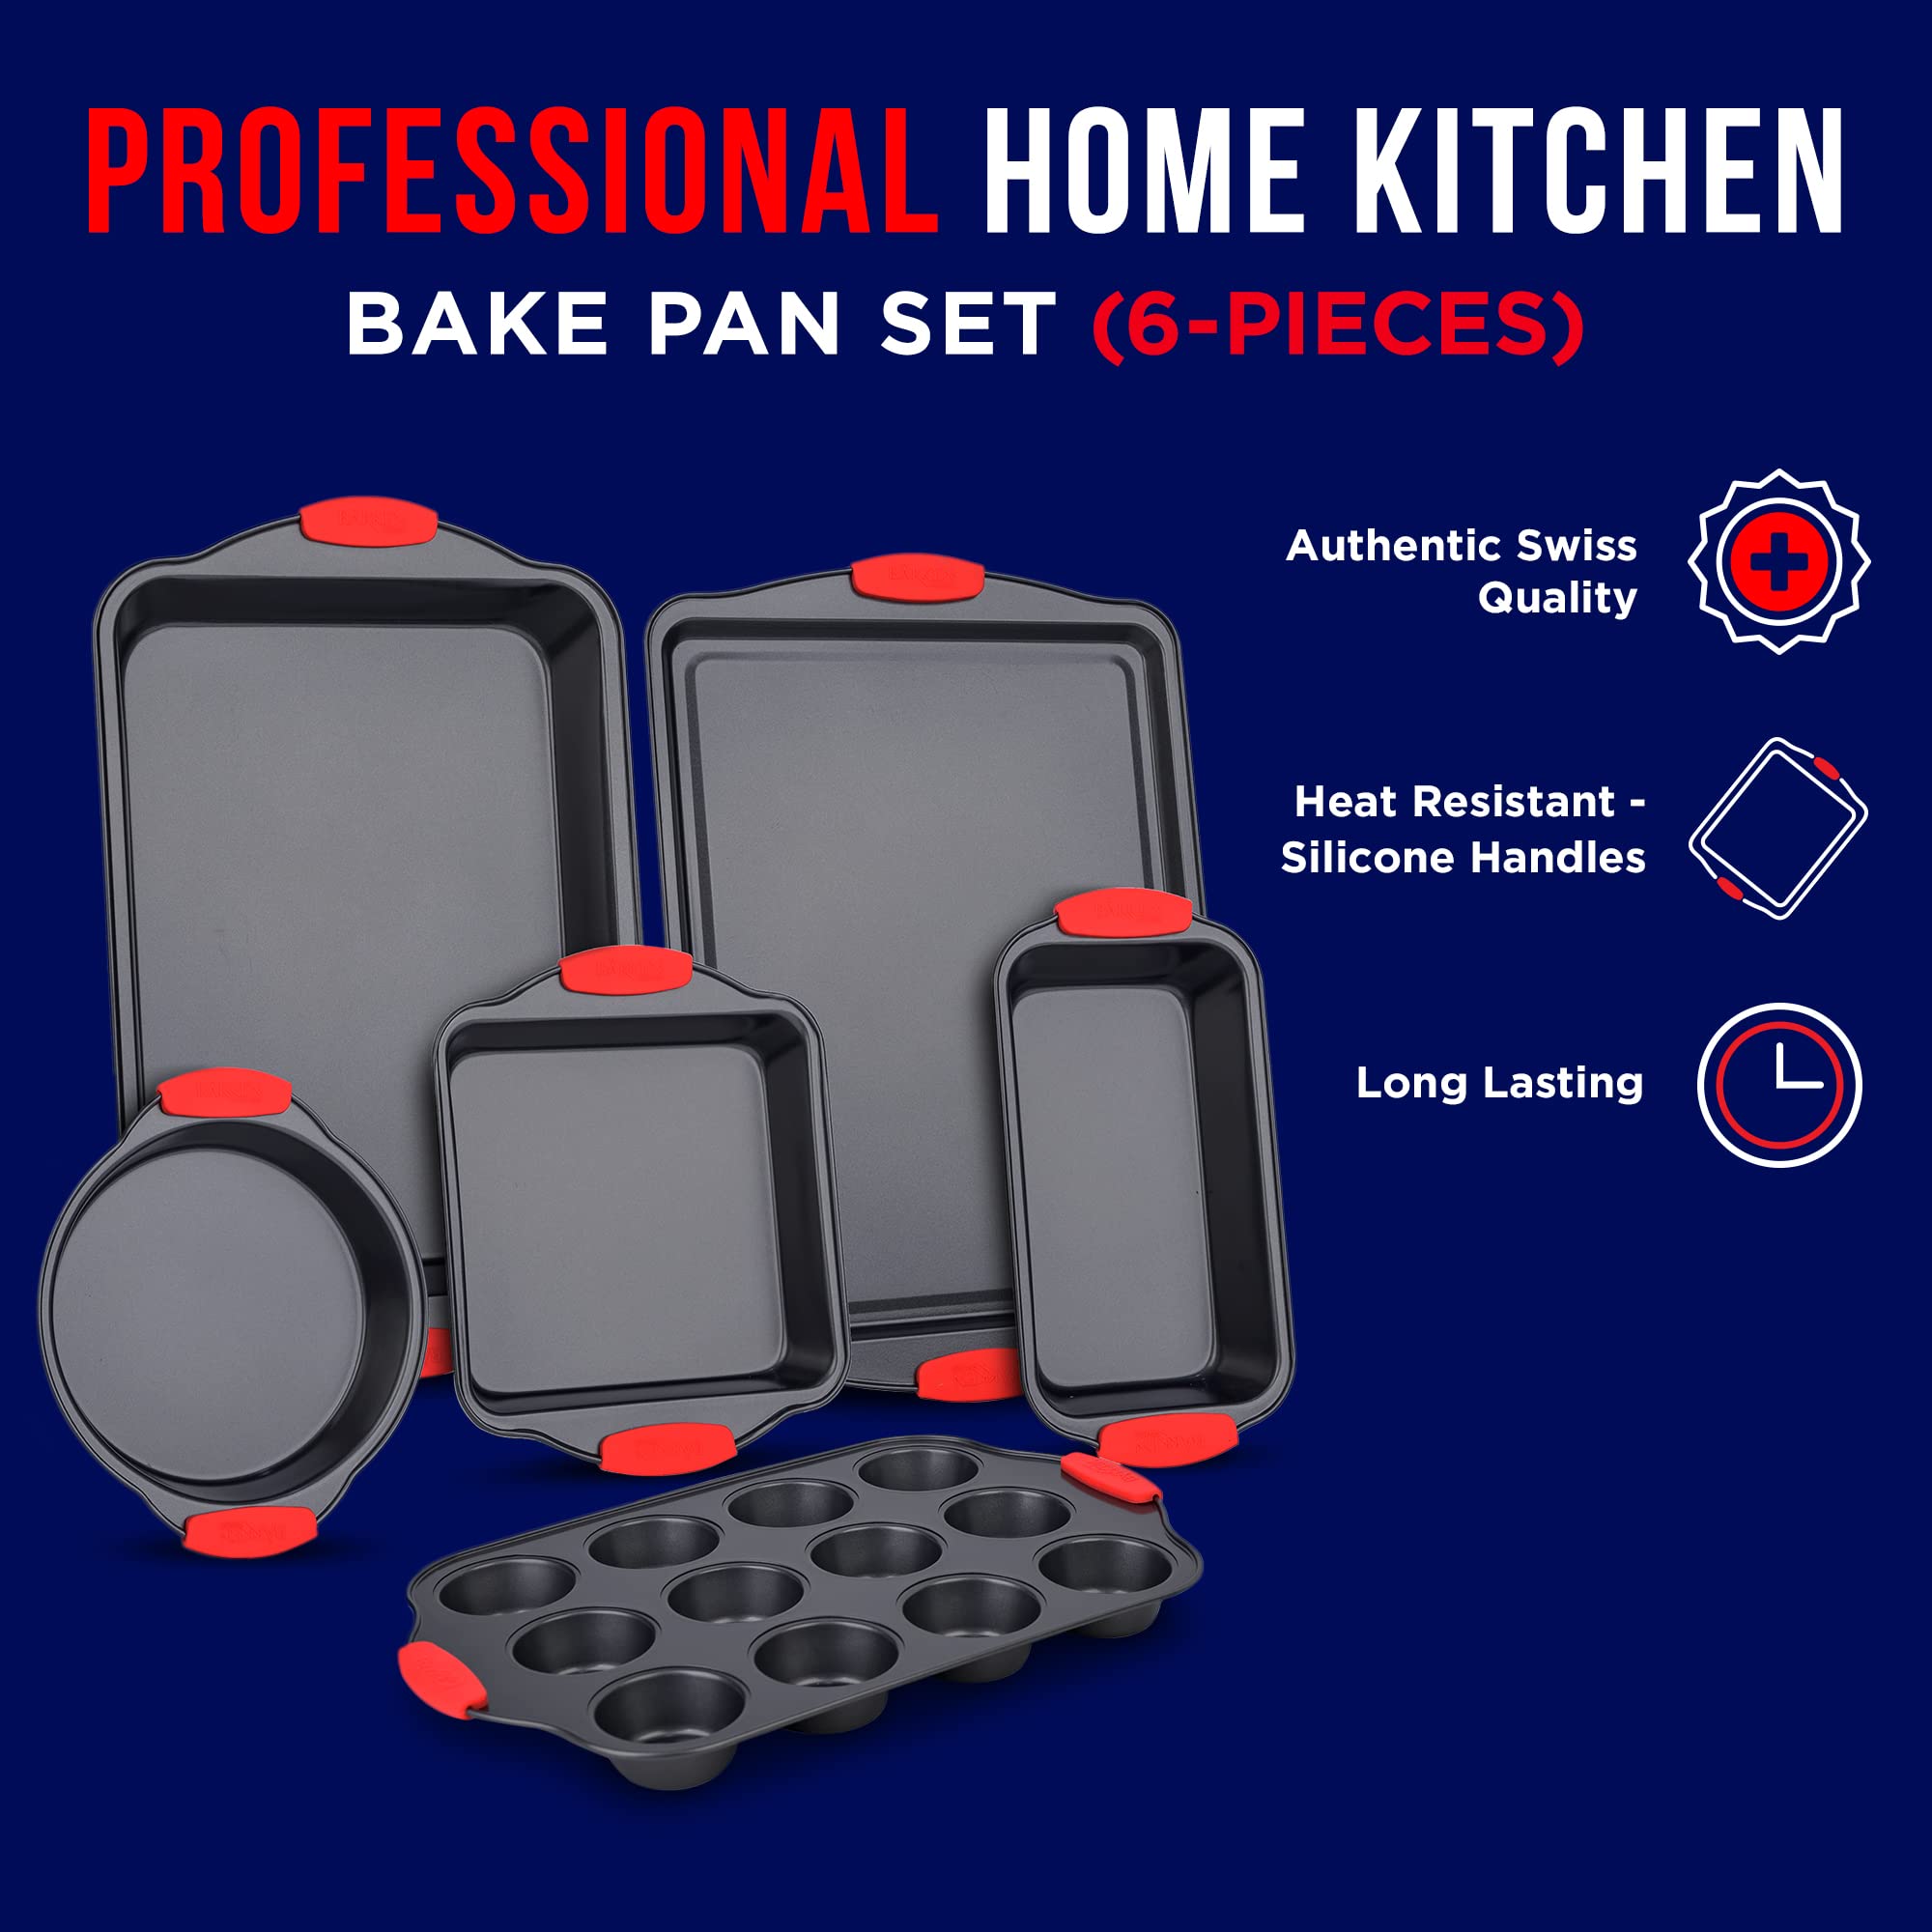 Baking Set – 6 Piece Kitchen Oven Bakeware Set – Deluxe Non-Stick Black Coating Inside and Outside – Carbon Steel – Red Silicone Handles – PFOA PFOS and PTFE Free by Bakken